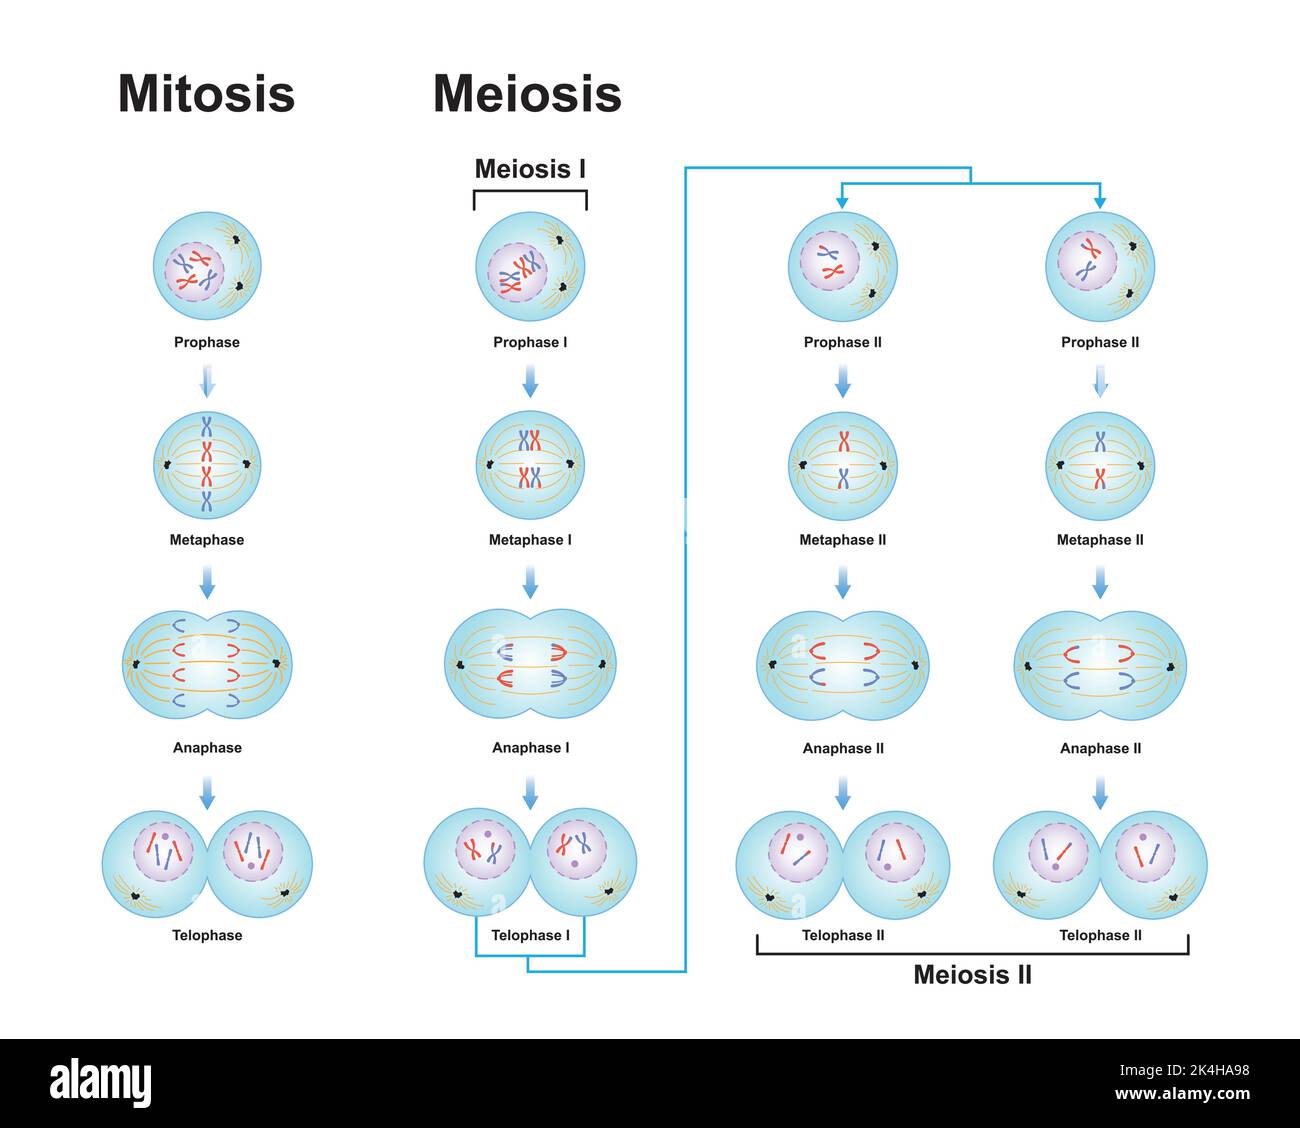 Scientific Designing of Differences Between Meiosis and Mitosis. Colorful Symbols. Vector Illustration. Stock Vector